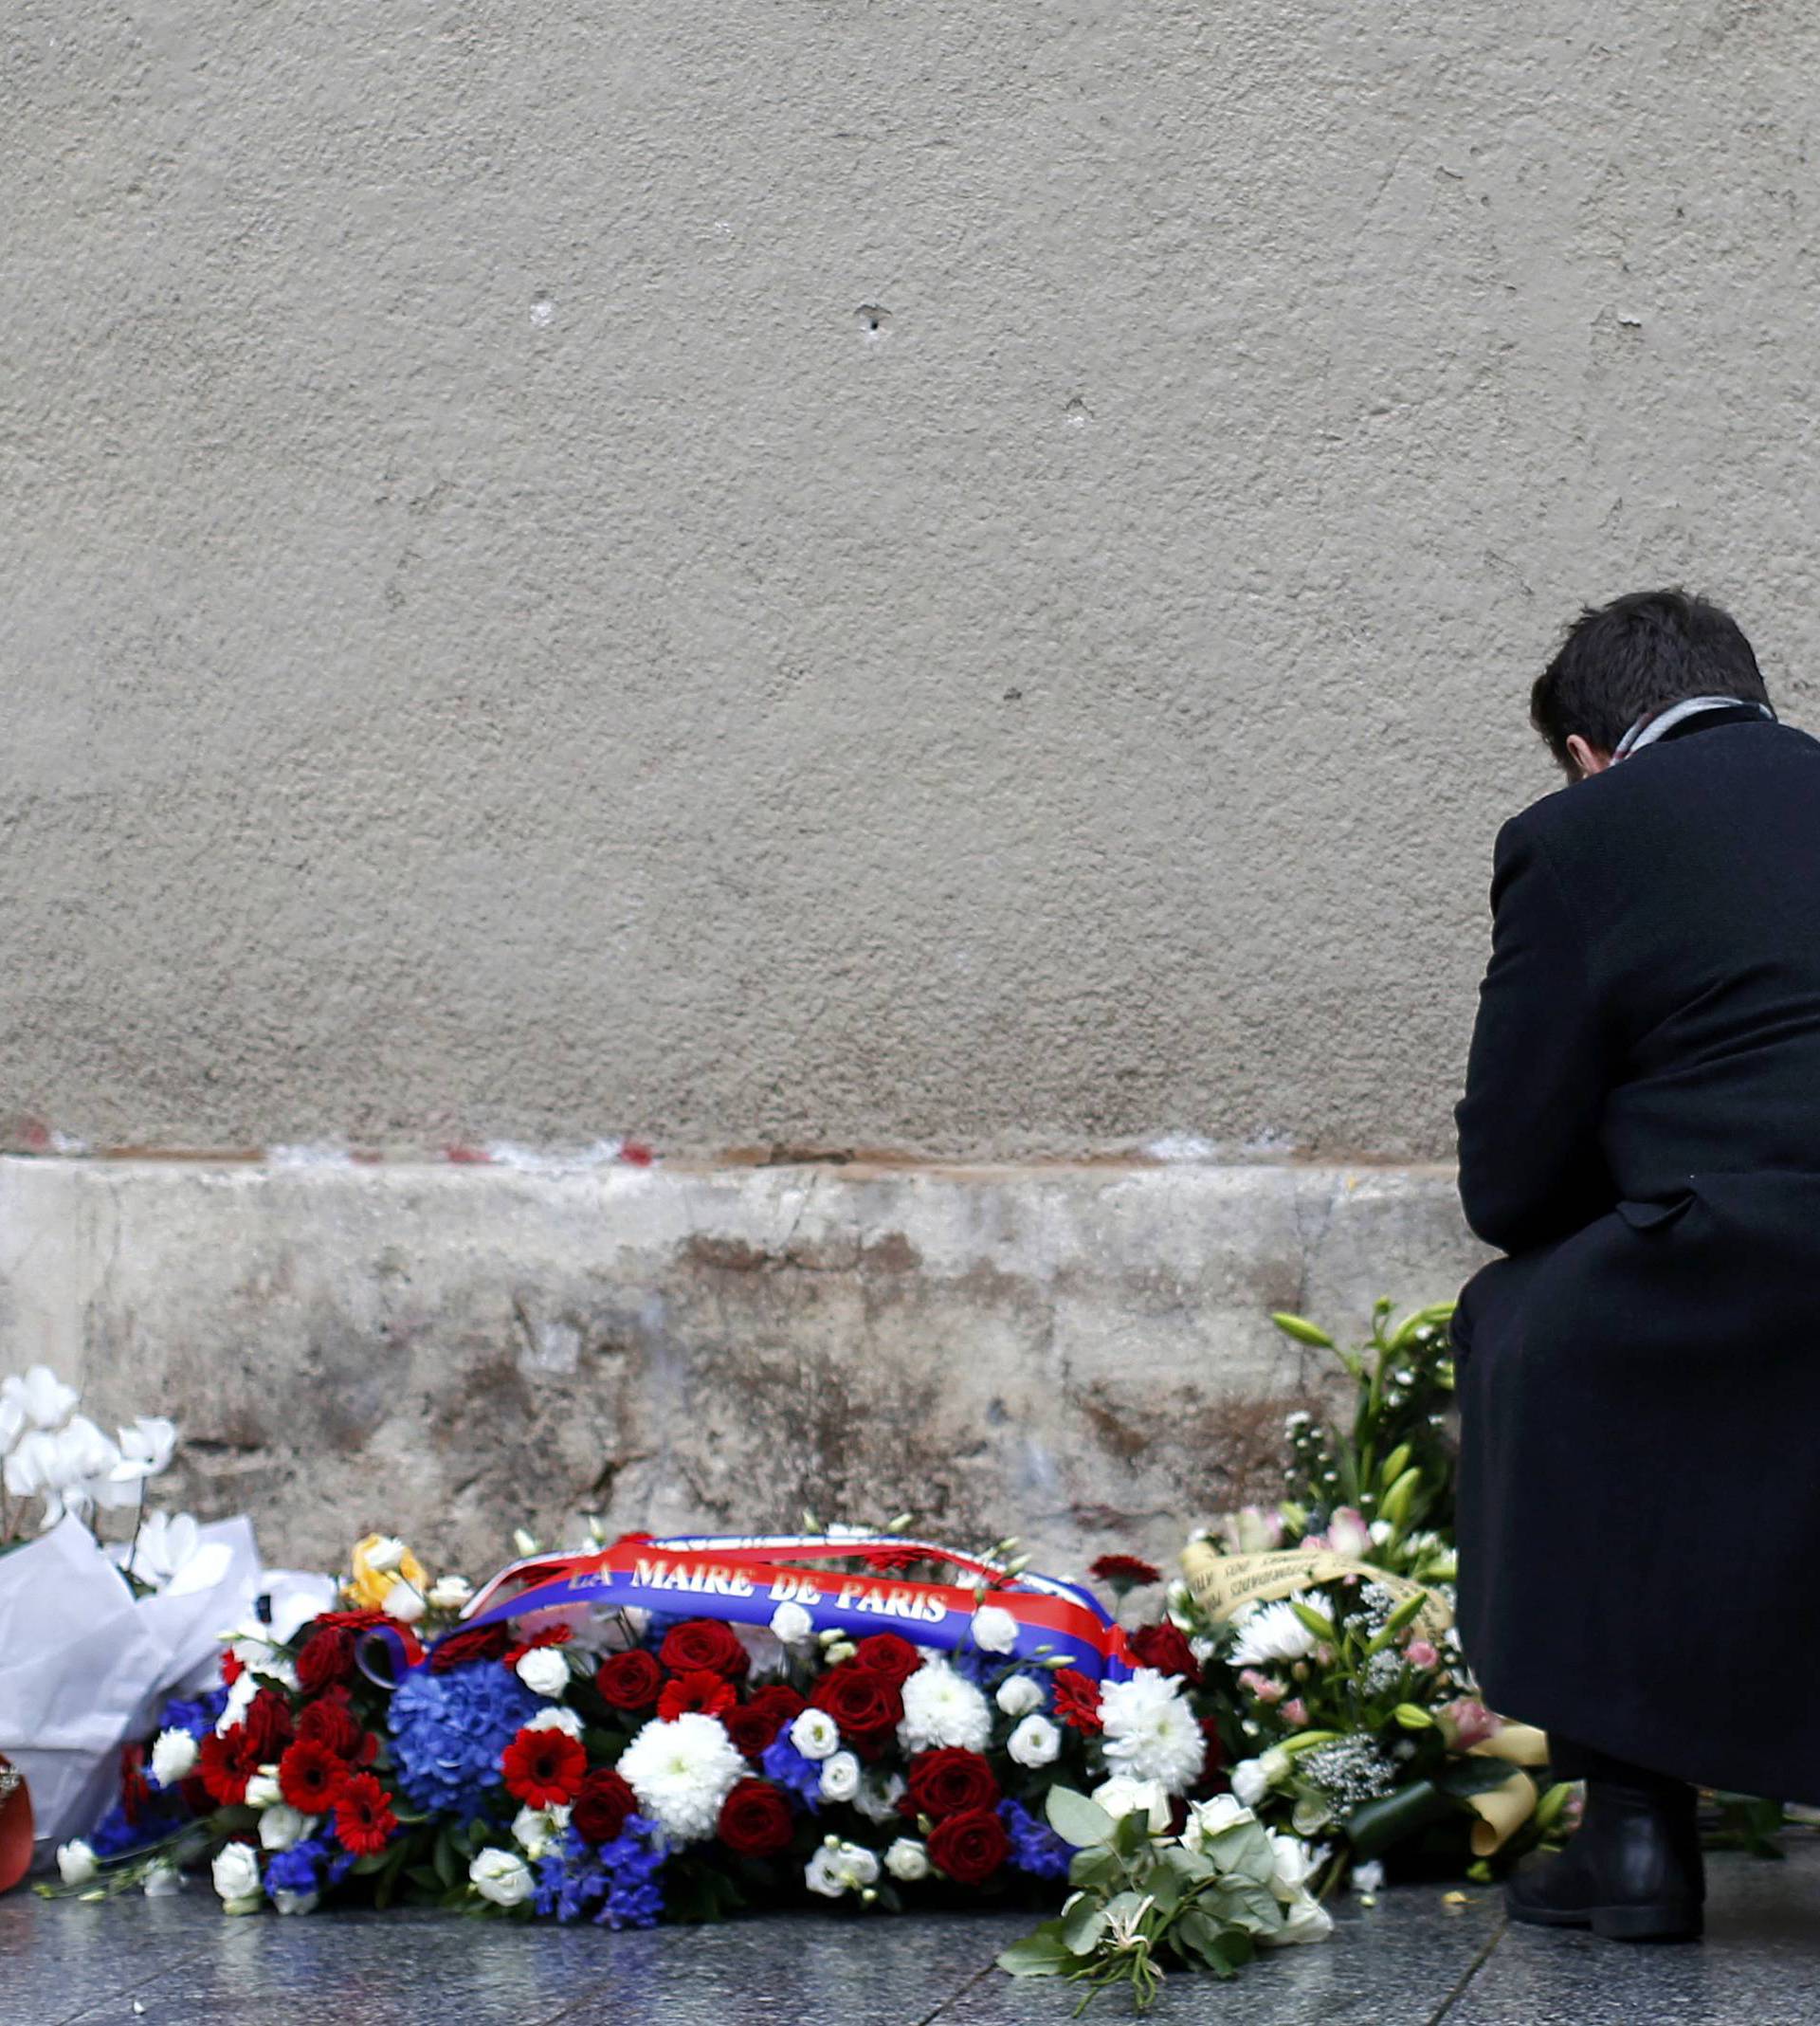 A man pays respects under a commemorative plaque unveiled by French President Francois Hollande and Paris Mayor Anne Hidalgo next to the "Le Carillon" and "Le Petit Cambodge" bars and restaurants in Paris